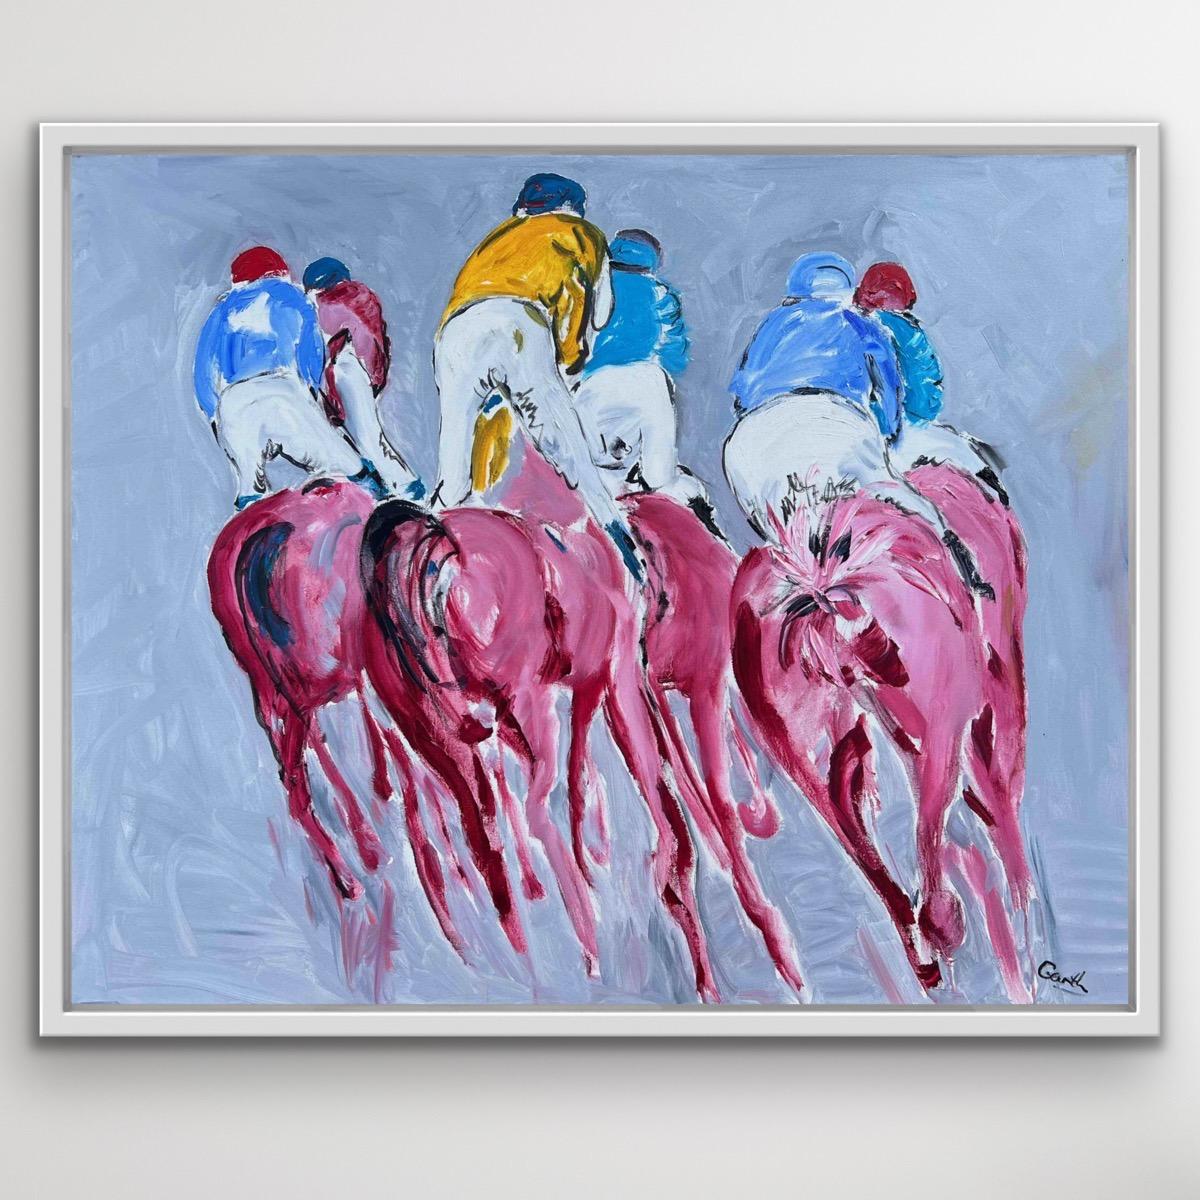 Red Rumps -Horses Racing an original painting by Garth Bayley. Oil on Canvas There they go into the distance, a convivial bunch. Affordable art. Horses Capturing the Heart of Moments
Garth Bayley is available at Wychwood Art online and in our